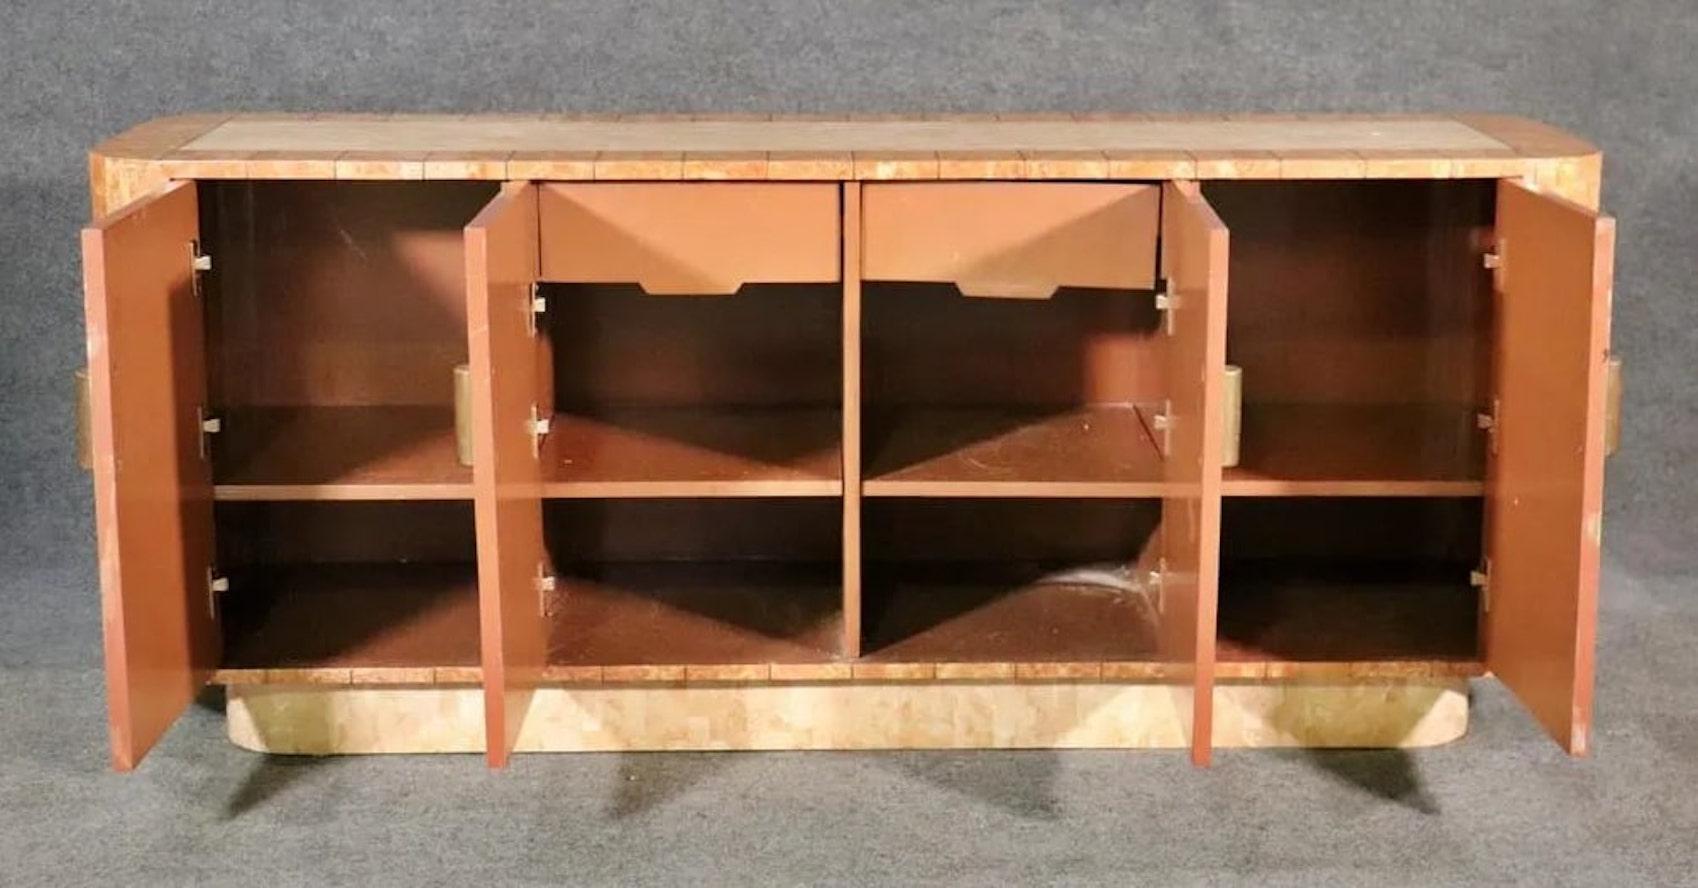 Vintage cabinet made with tessellated stone with inlaid brass trimming. Made in an art deco fashion with ample storage for home or office.
Please confirm location NY or NJ